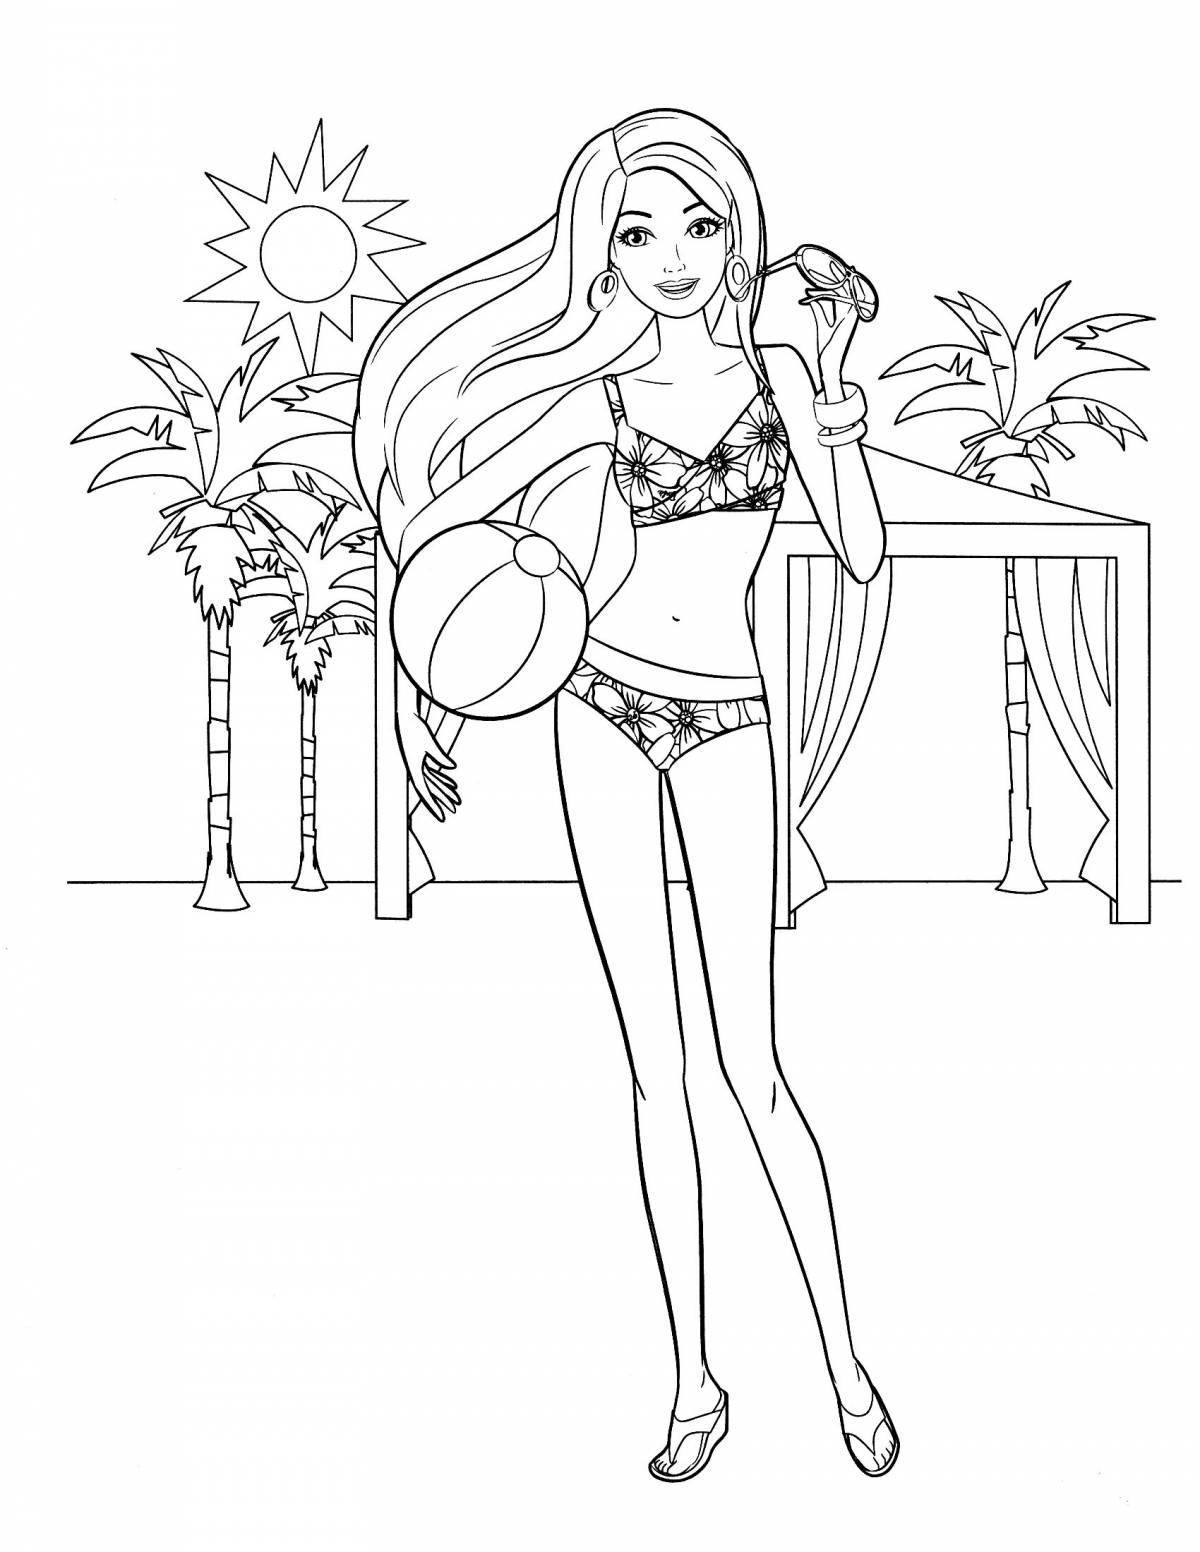 Charming barbie coloring book